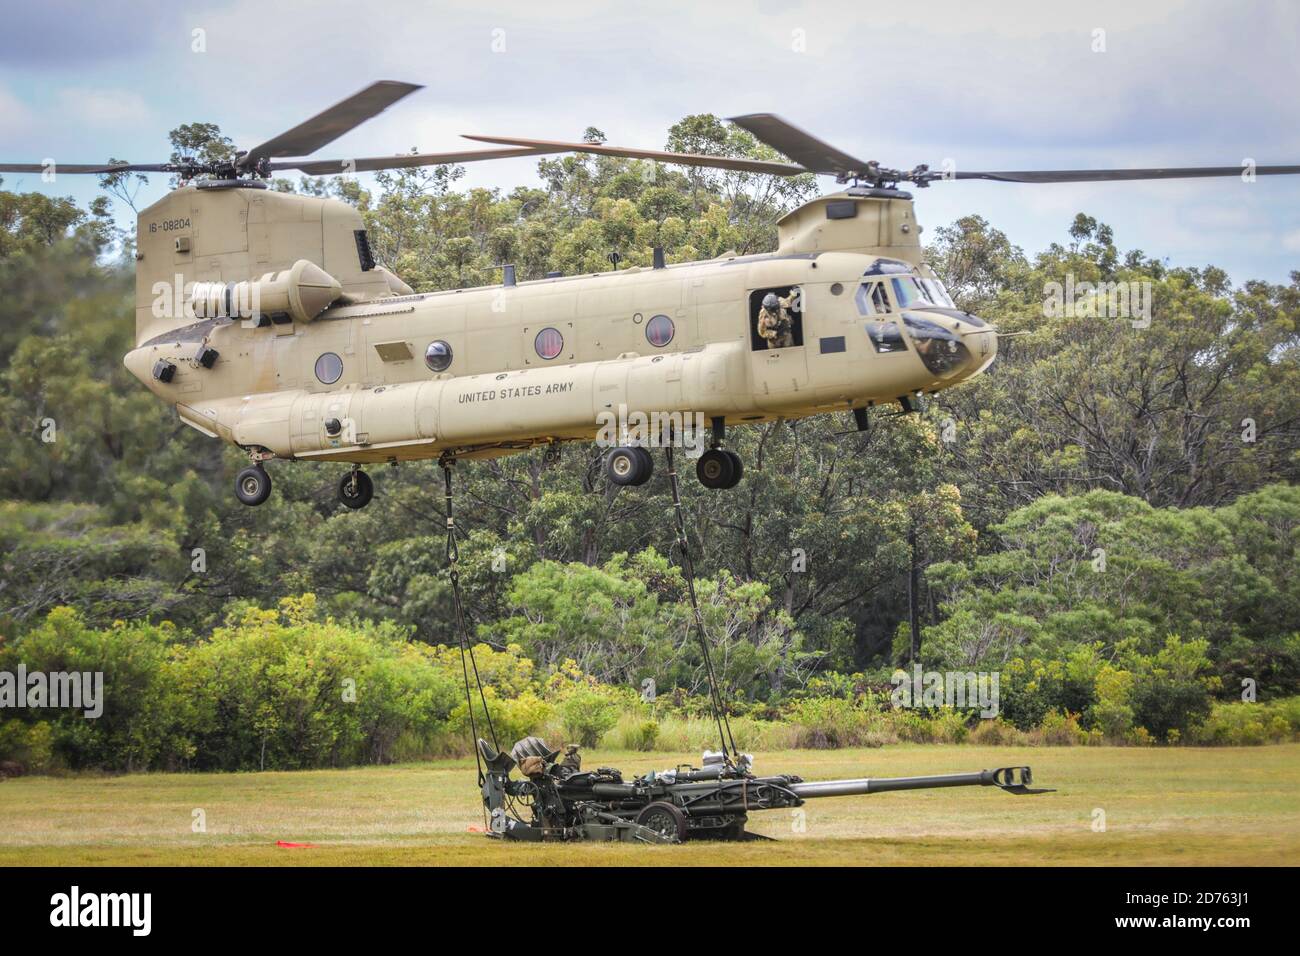 SCHOFIELD BARRACKS, Hawaii - A 25th Infantry Division CH-47 Chinook carries a sling load with a M777 Howitzer in preparation for a capabilities demonstration for Lt. Gen. S K Saini, Vice Chief of the Army Staff of the Indian Army on Schofield Barracks East Range, Hawaii, on Oct. 19, 2020.  This visit will enhance the operational and strategic level collaboration between the two armies and builds towards a free and open USINDOPACOM Stock Photo